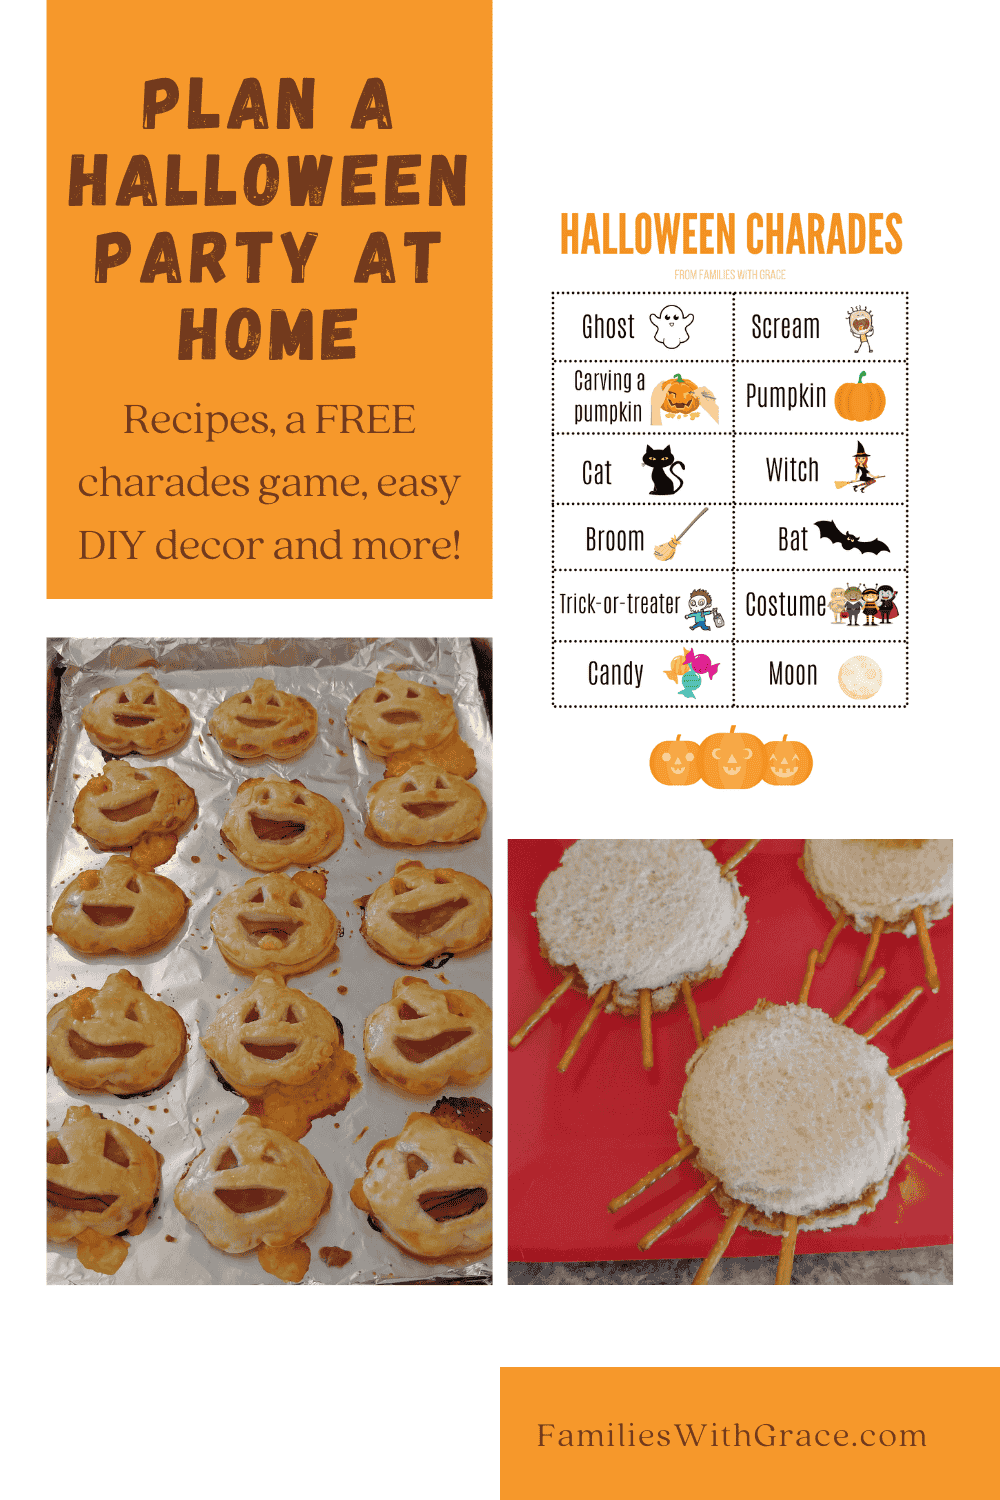 Plan a Halloween party at home (with recipes and FREE Halloween charades!)